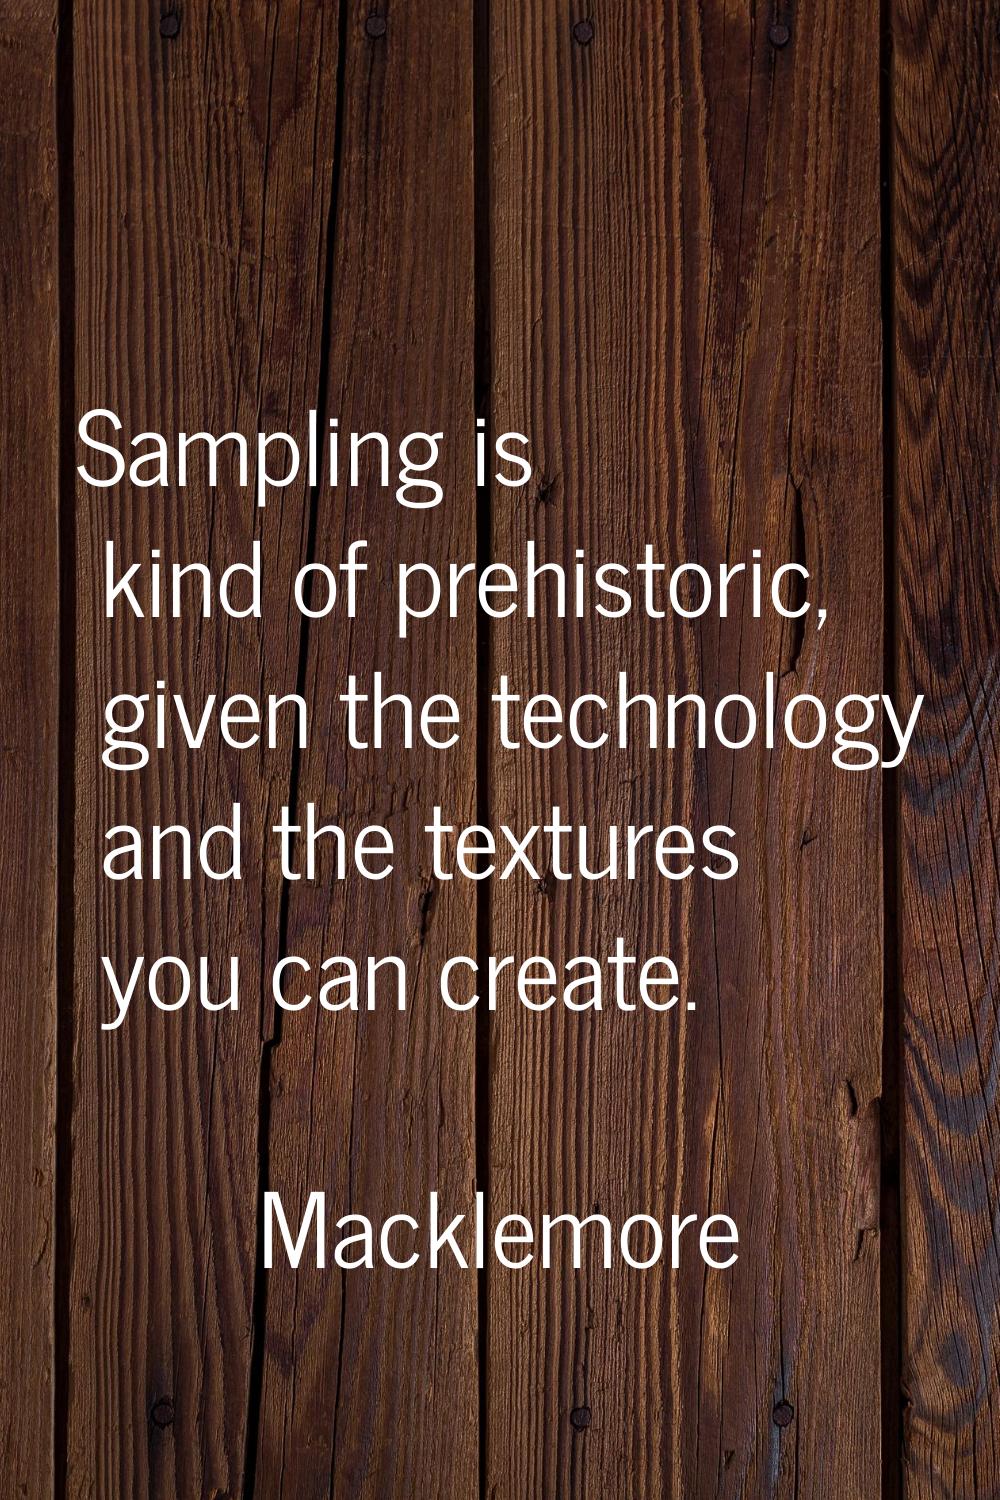 Sampling is kind of prehistoric, given the technology and the textures you can create.